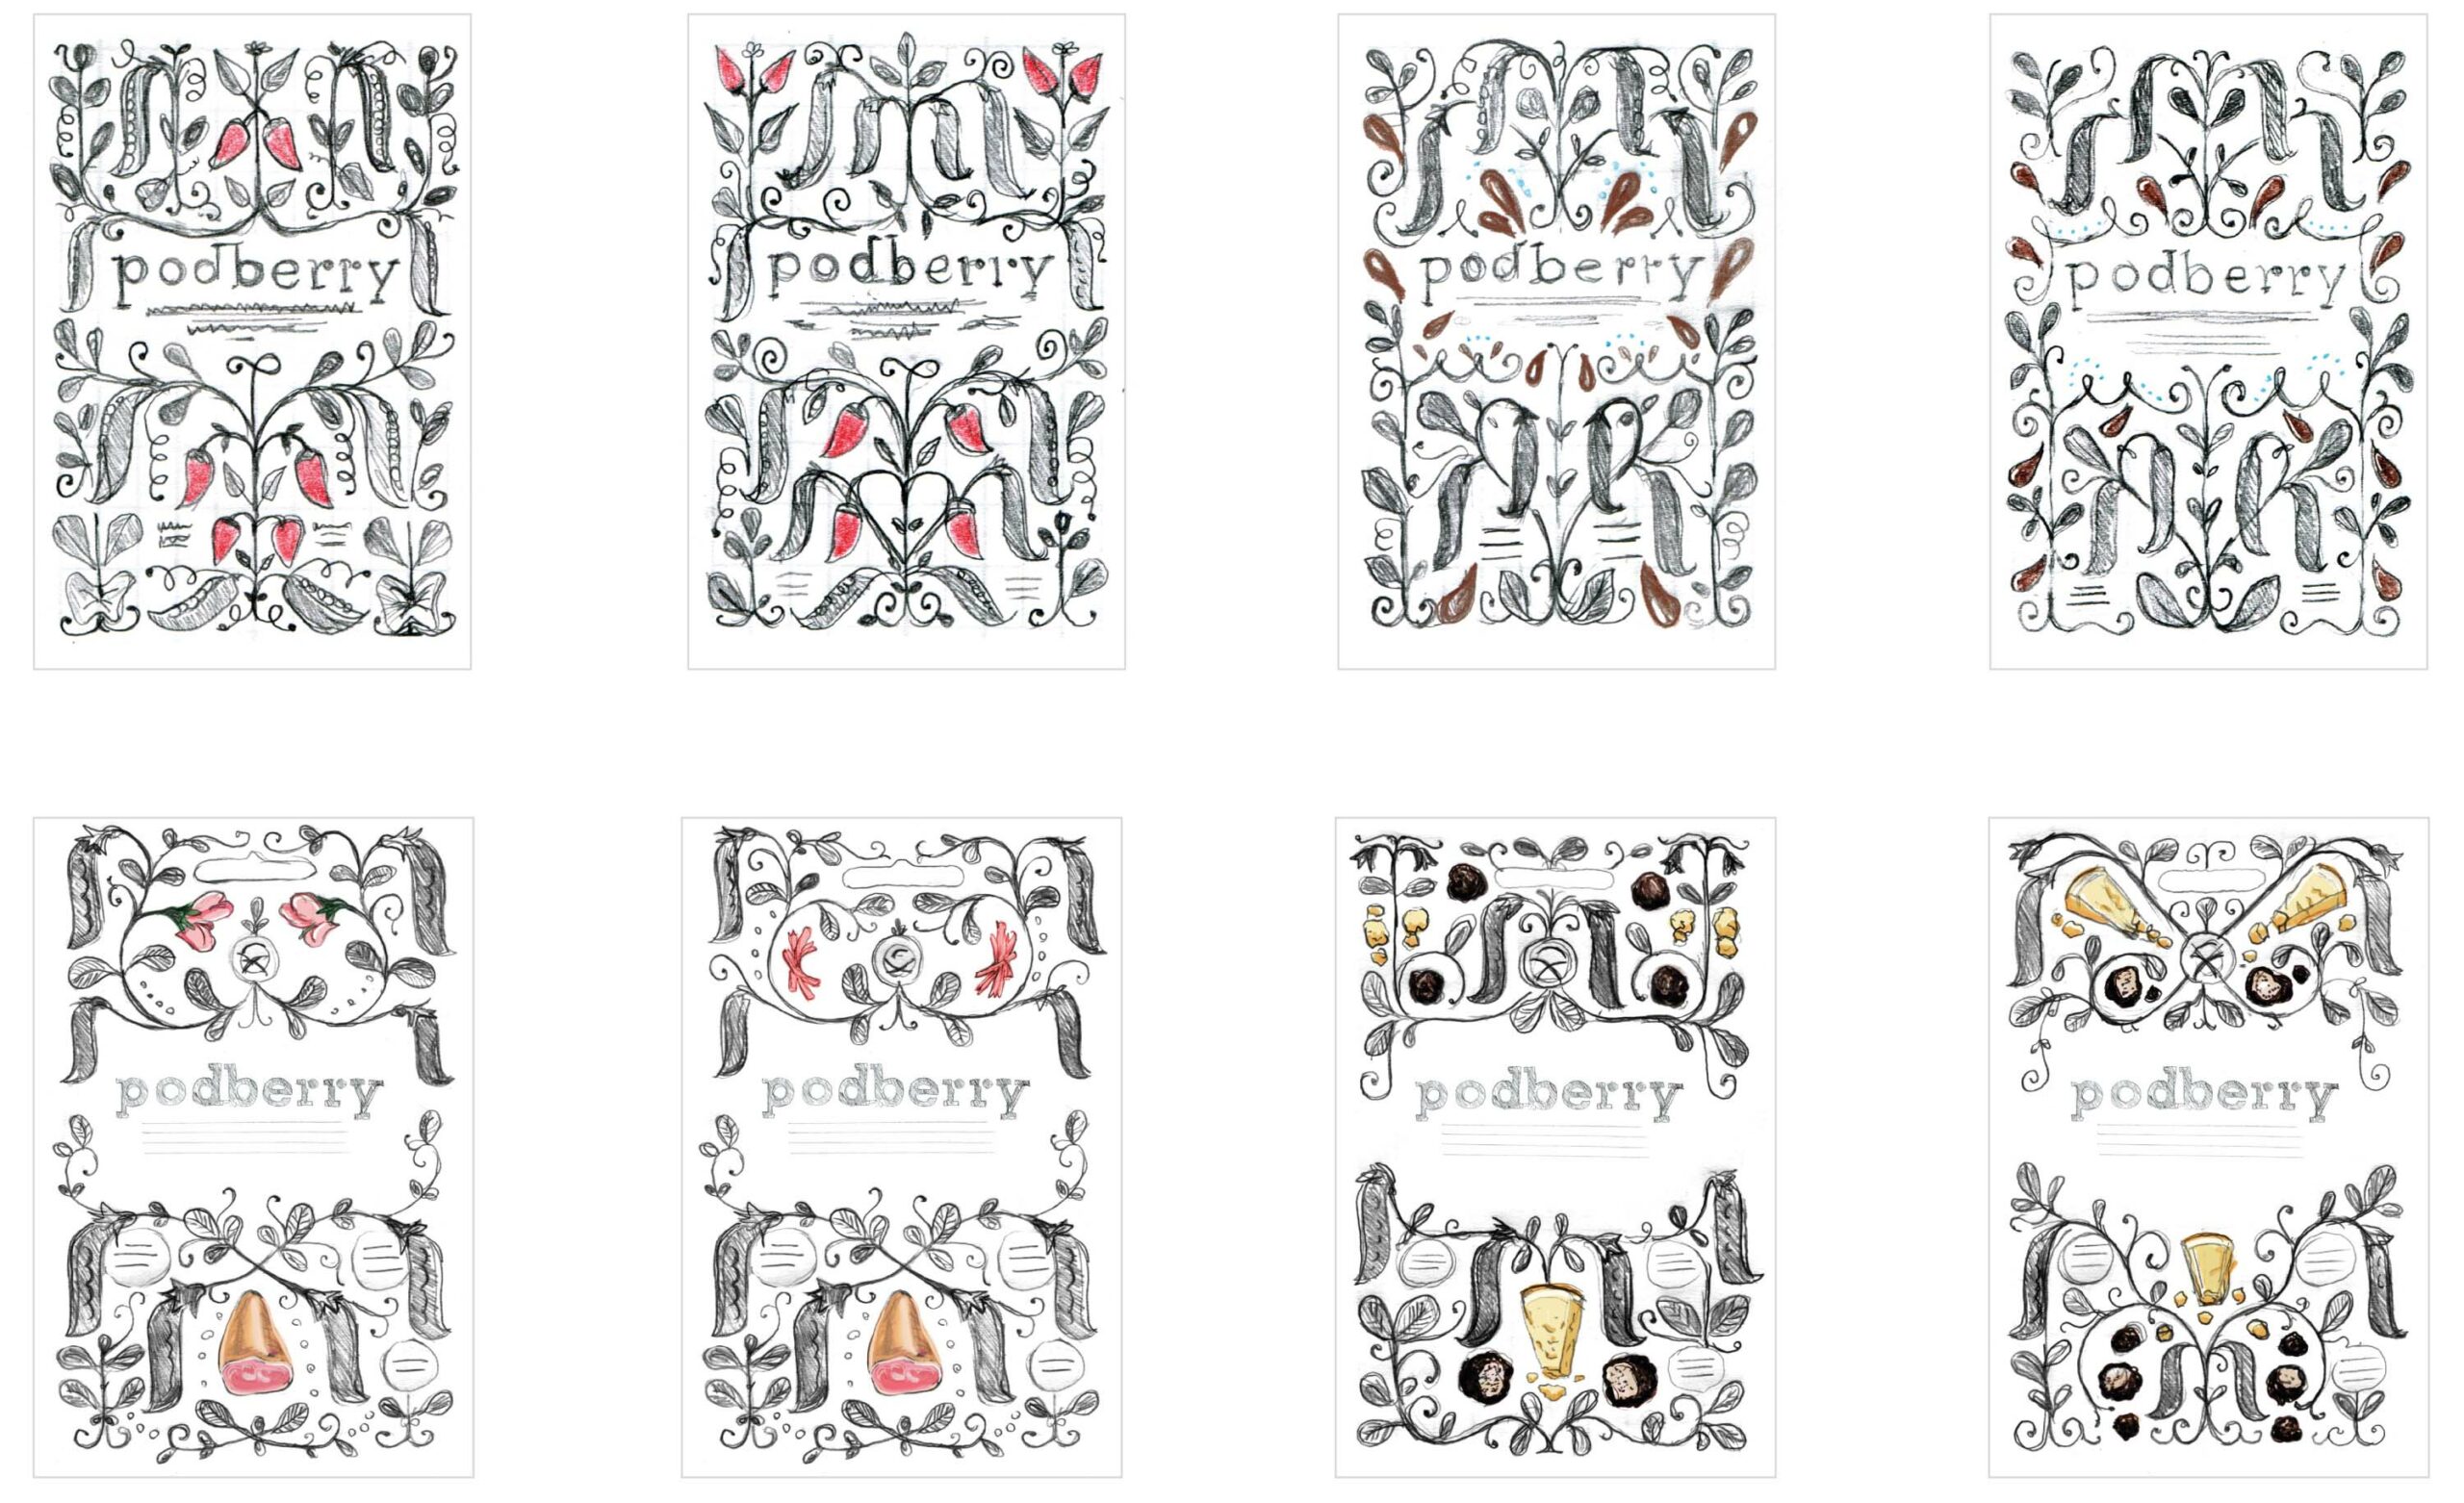 Podberry Pack Illustration all sketches | Jamie Clarke Type